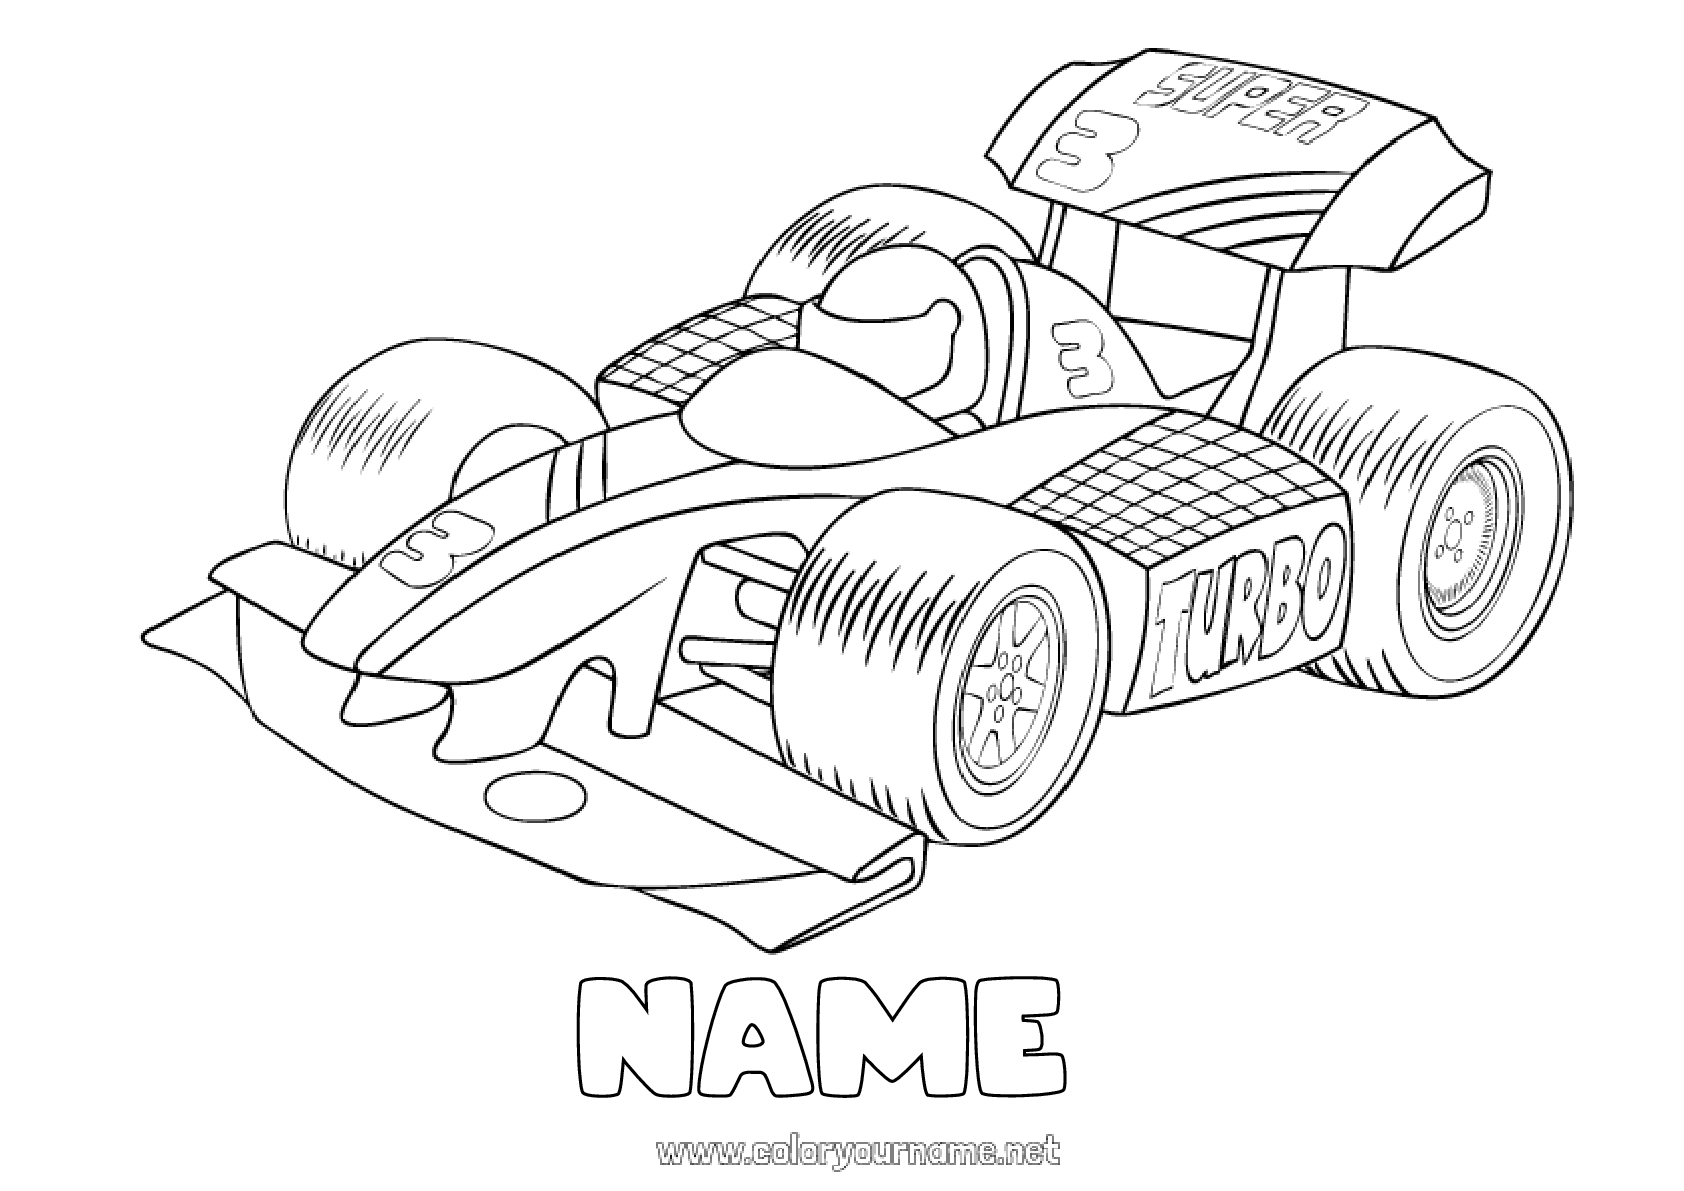 Coloriage n°343 - Véhicules Voiture Course